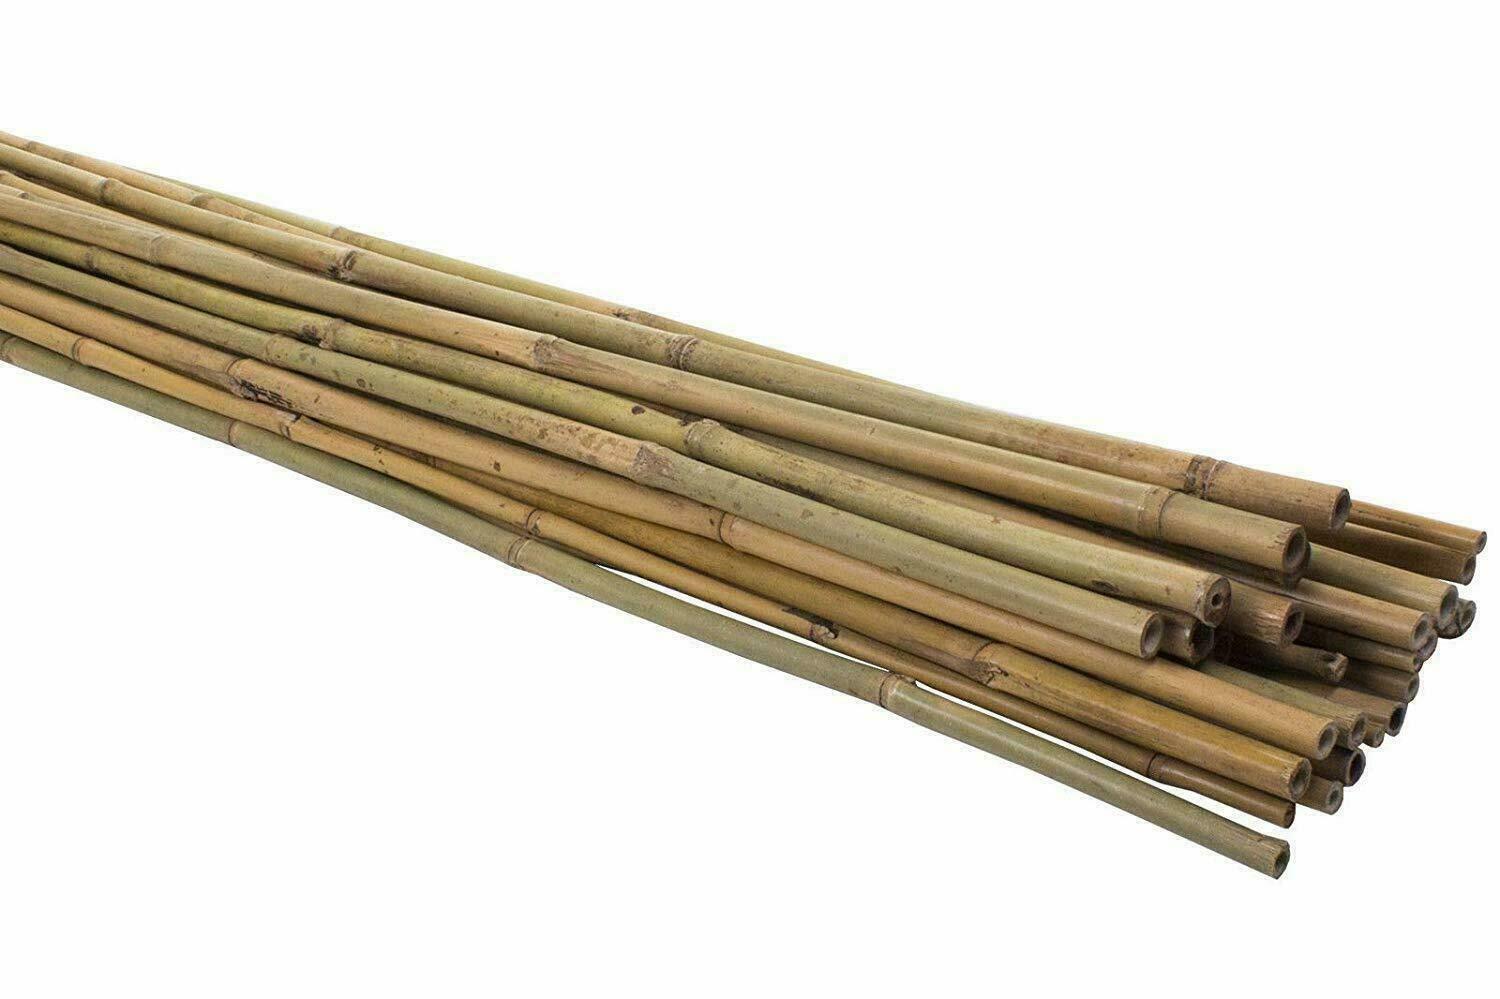 8-10mm Bamboo Stakes 4' - 25pk